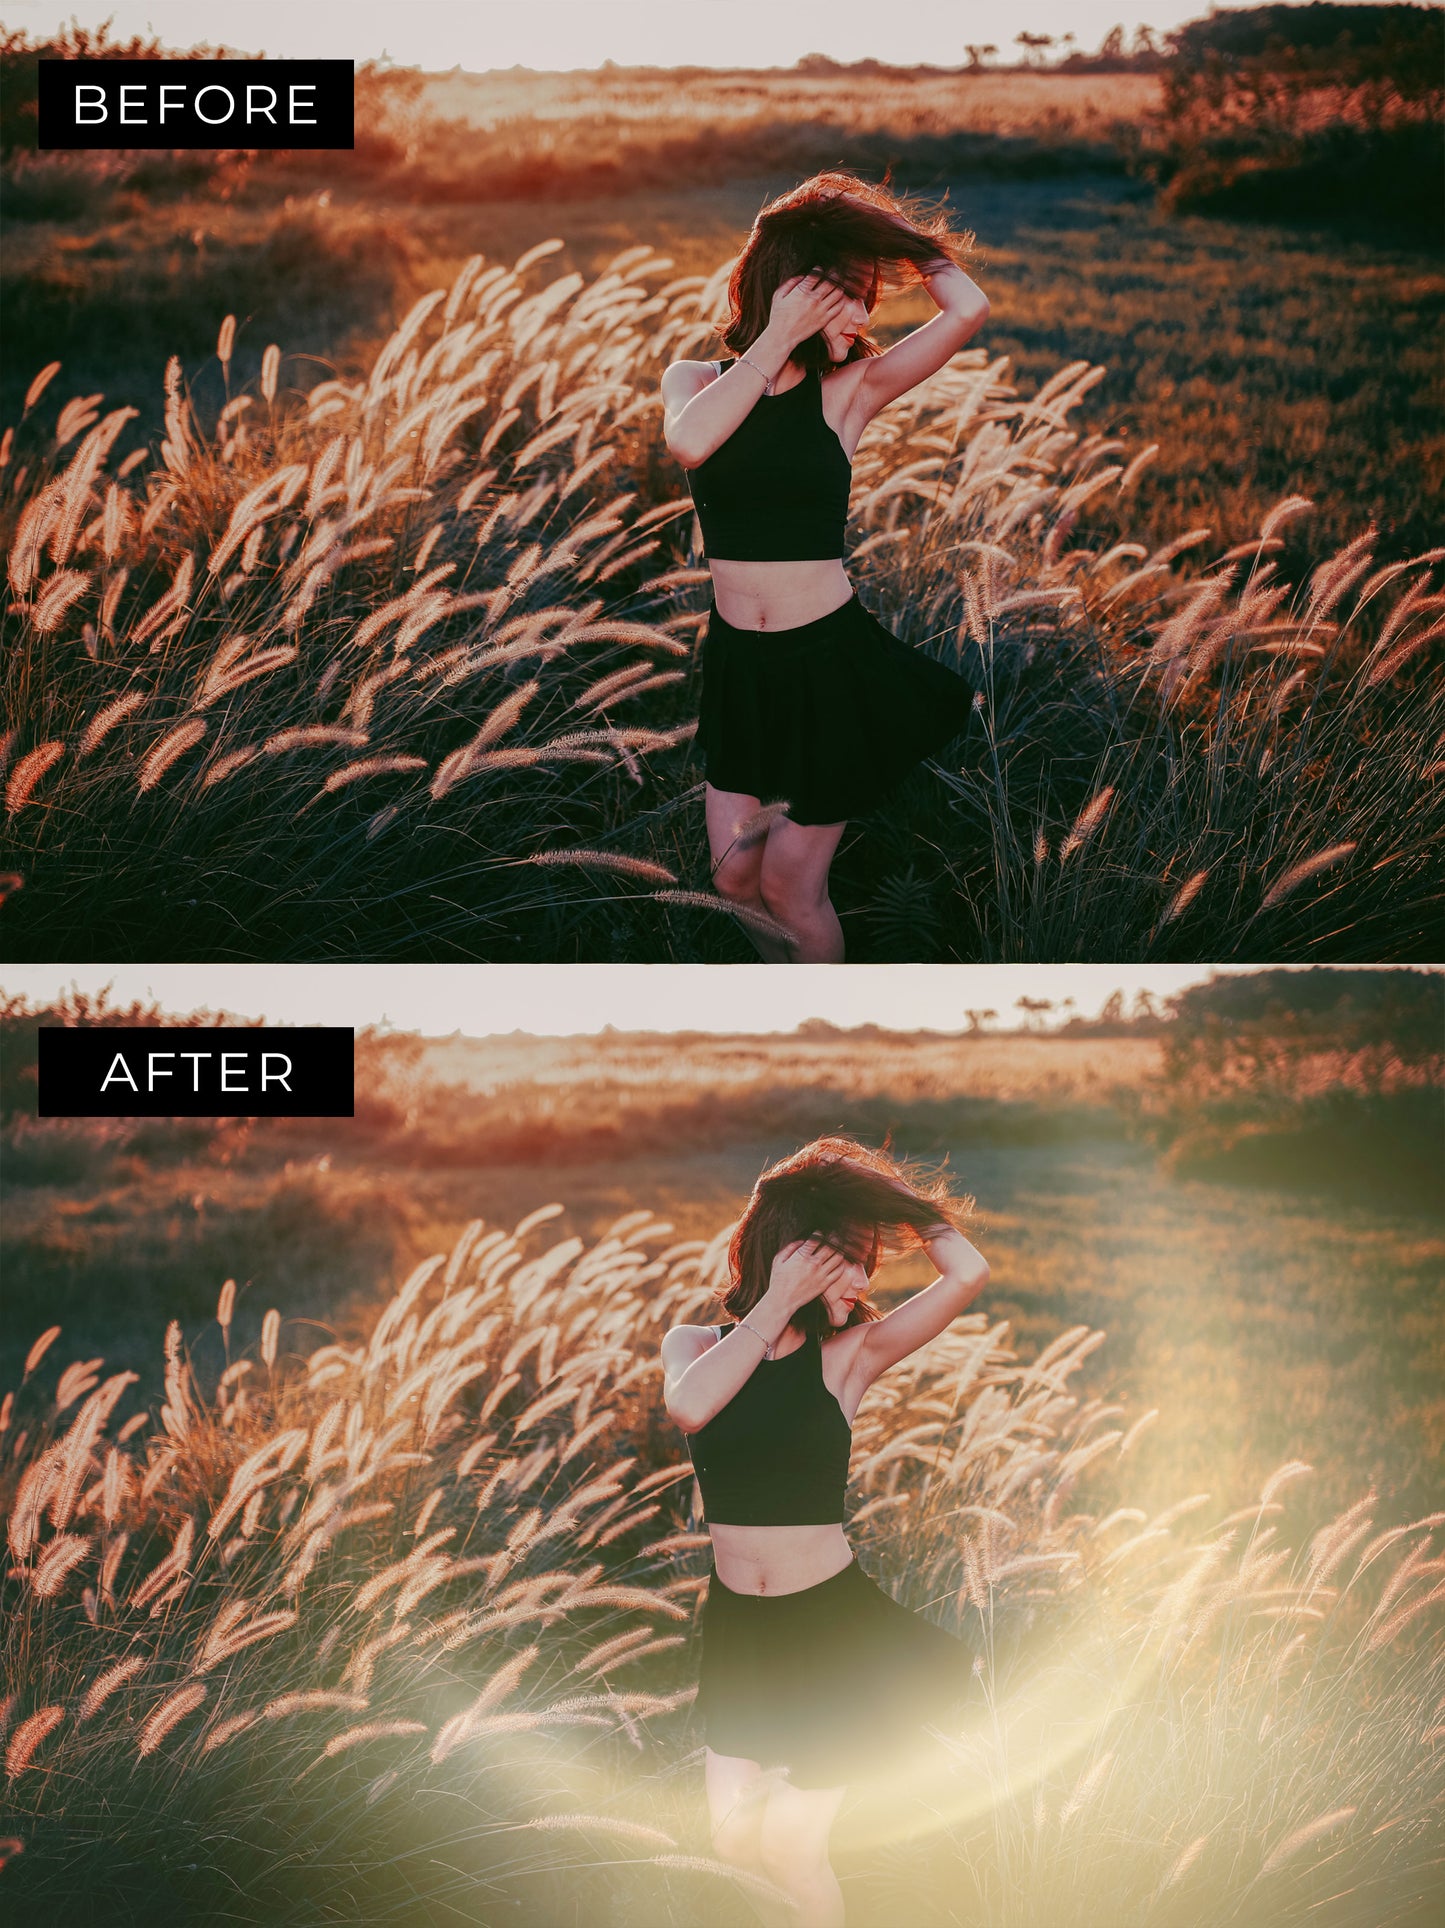 Ring Lens Flare Photo Overlays